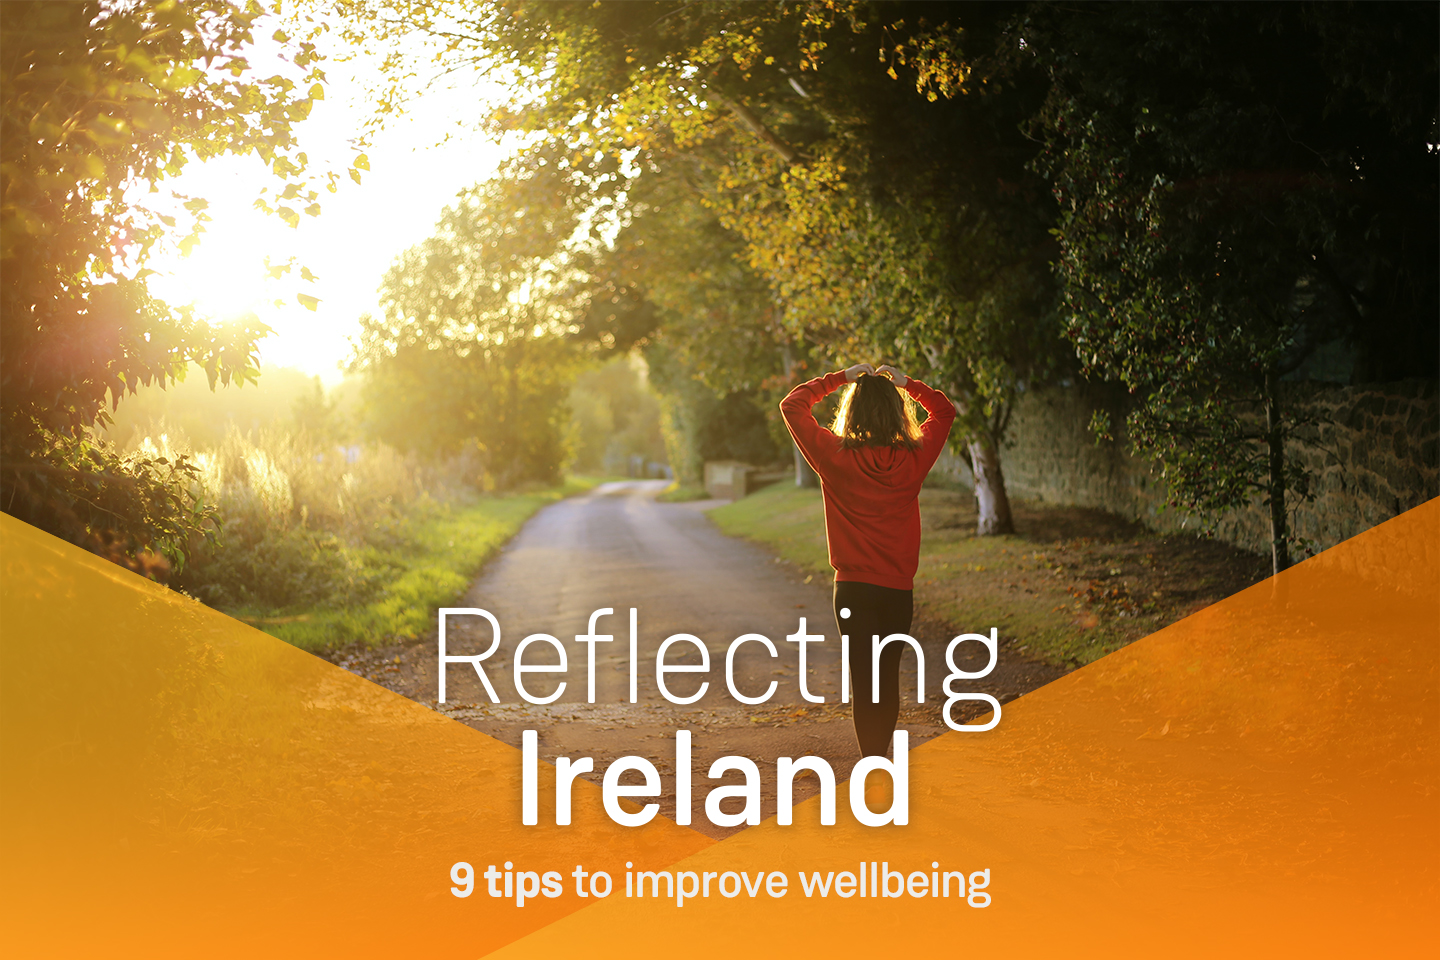 9 tips to improve wellbeing – based on behavioural science